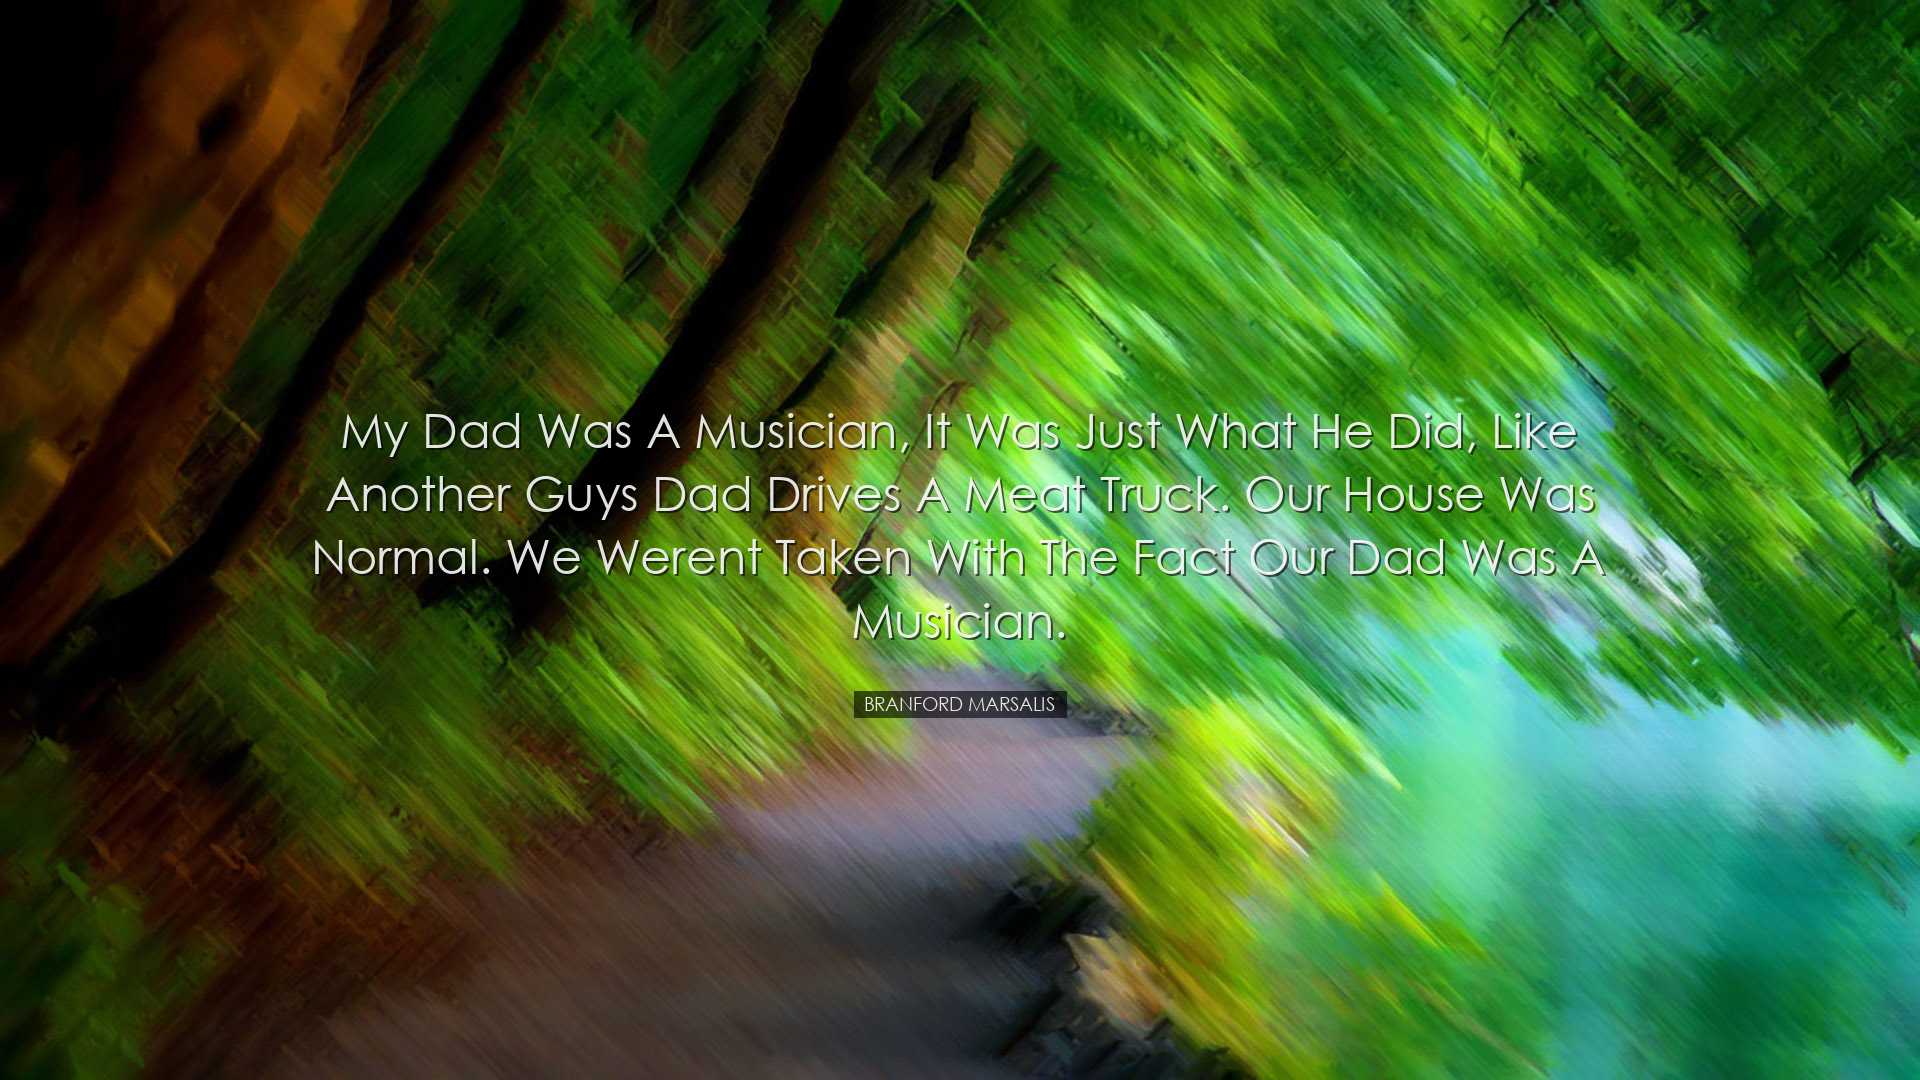 My dad was a musician, it was just what he did, like another guys